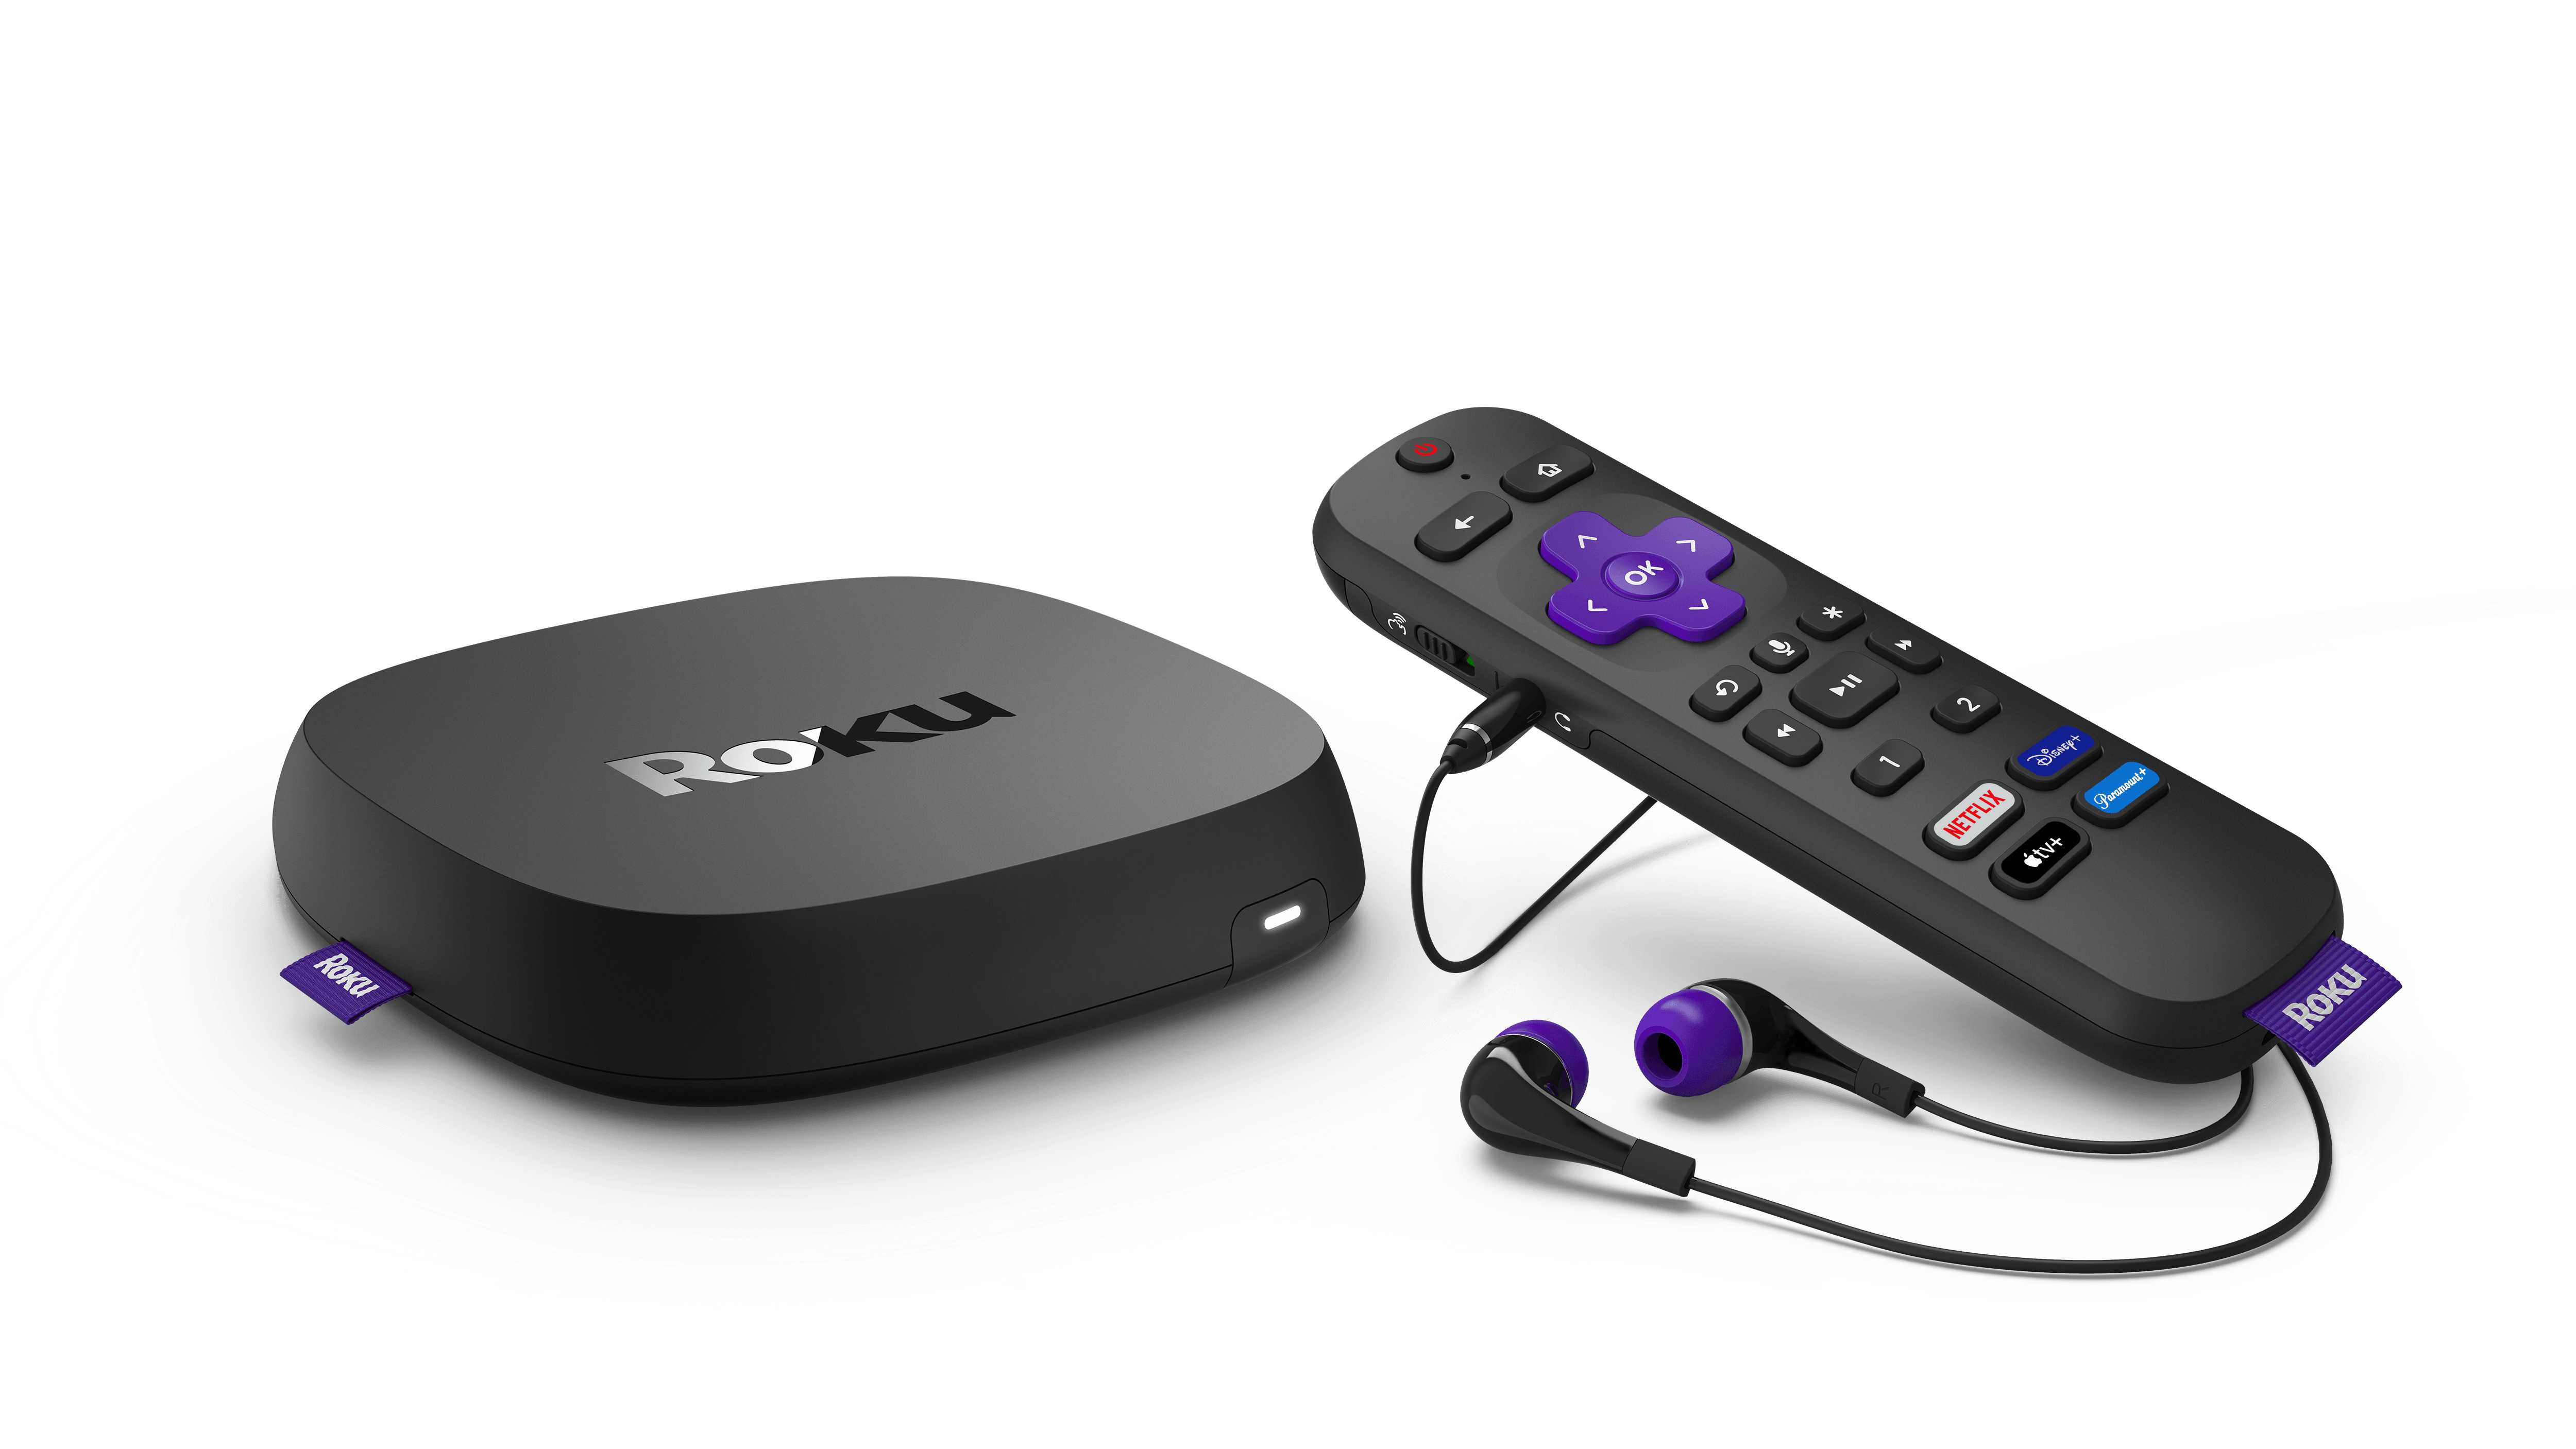 EXPIRED – Deal Alert! The Roku Ultra is Now Just $88.99 For a Limited Time